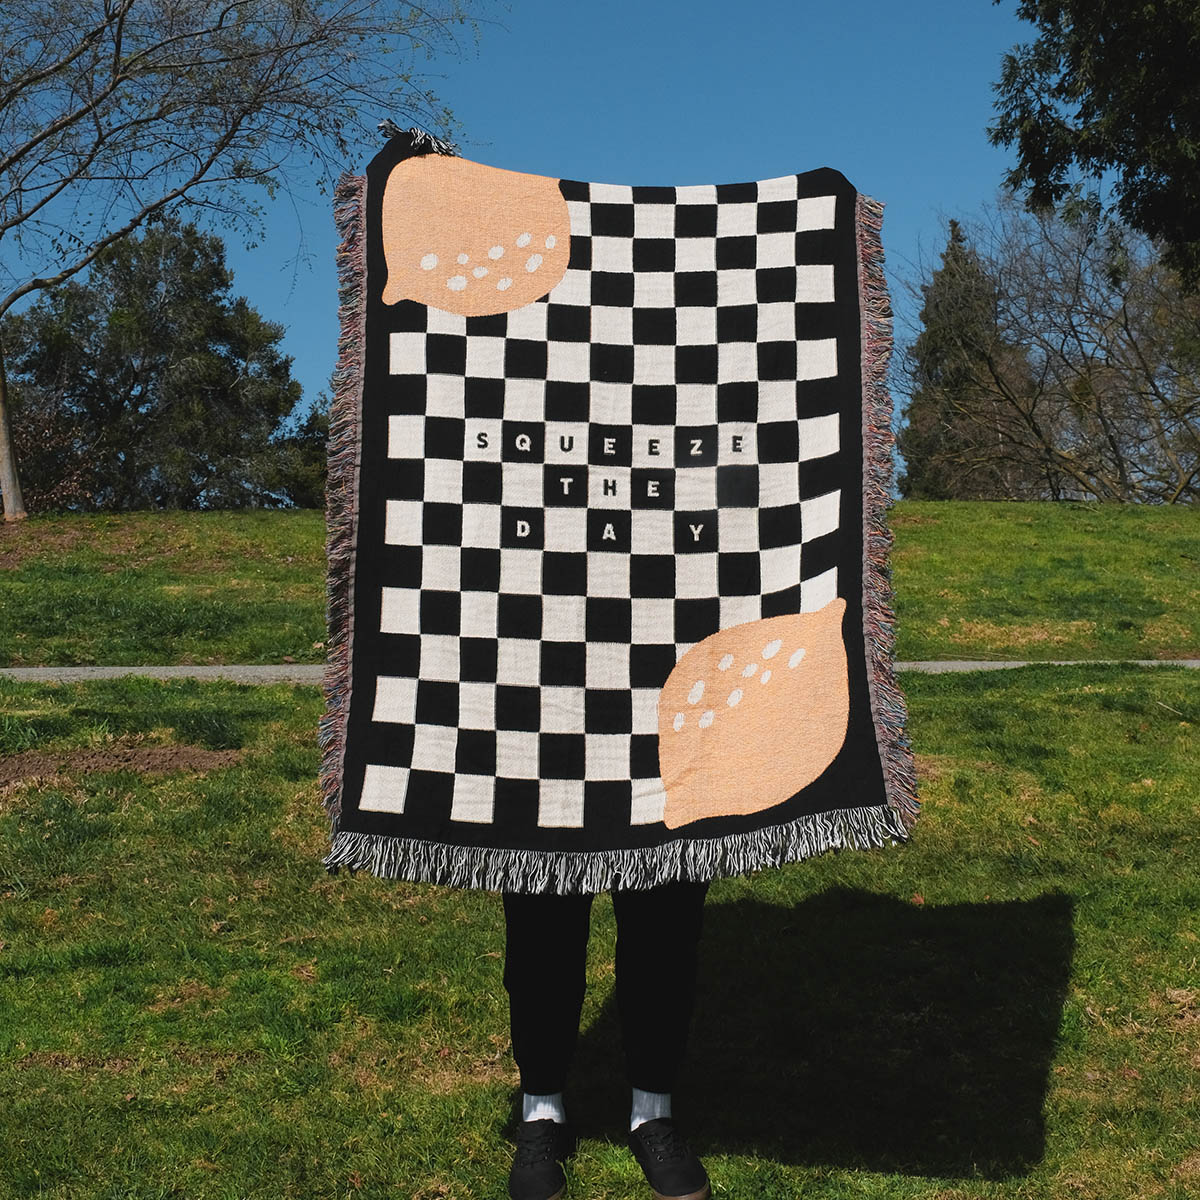 Squeeze The Day Woven Throw Blanket - Relatable Basic